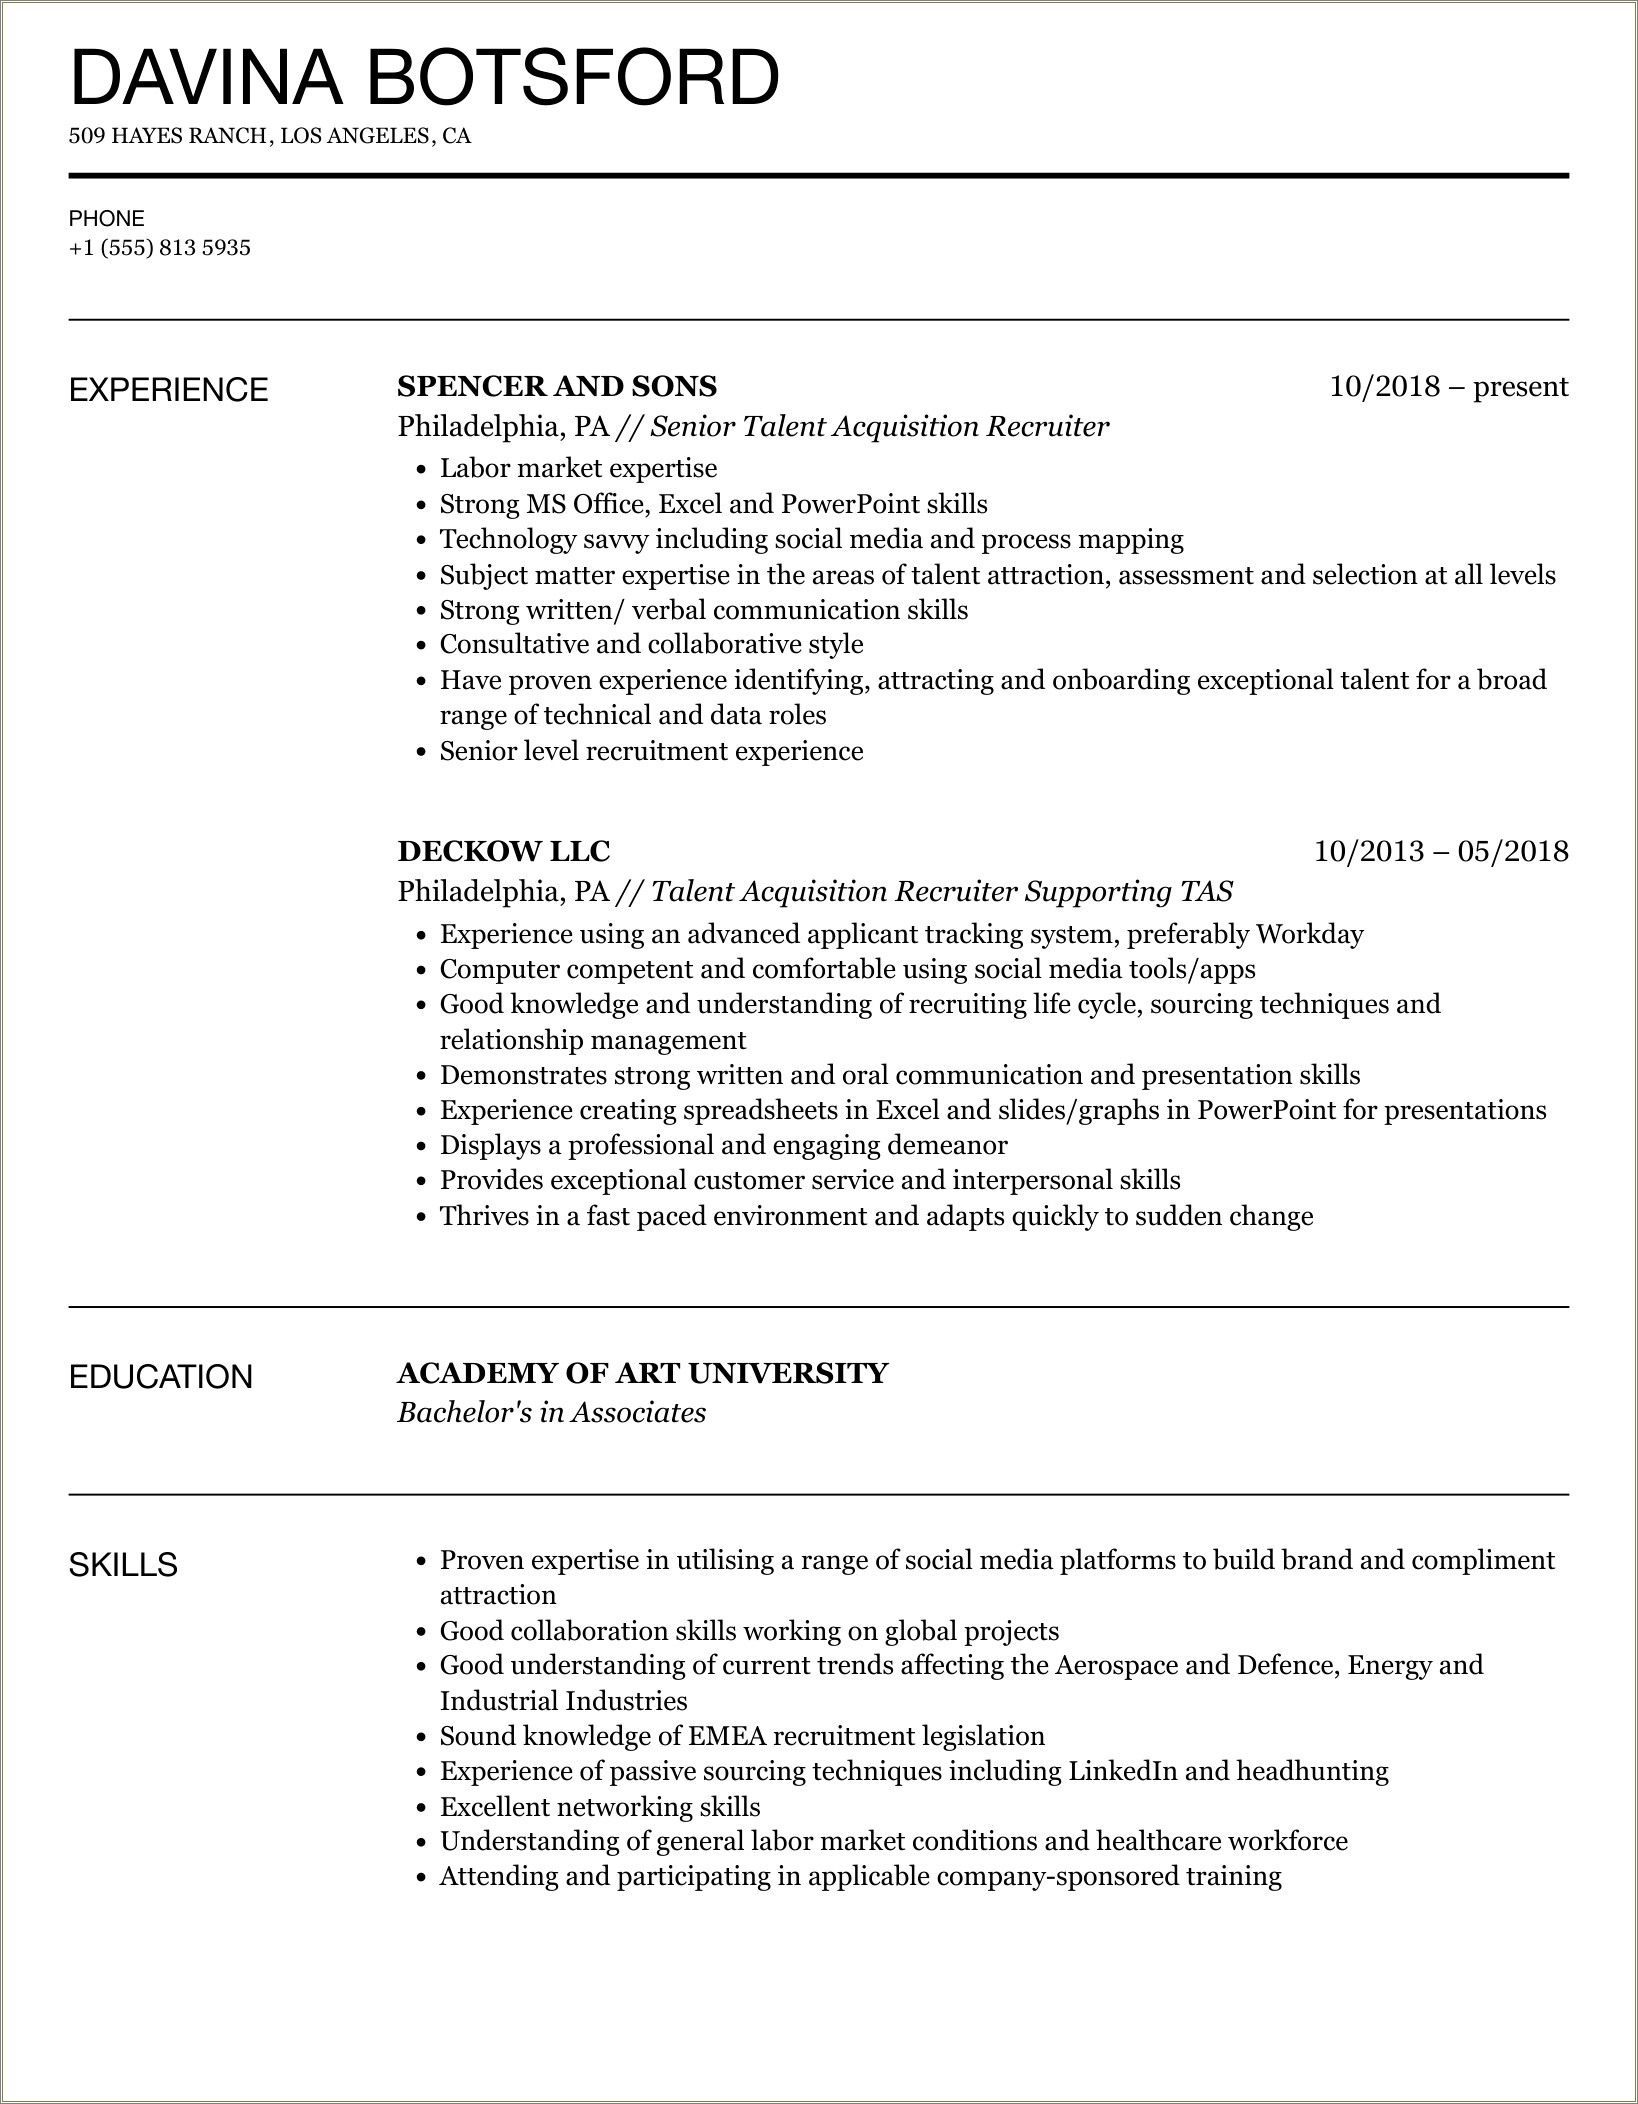 Email To Recruiter With Resume Example